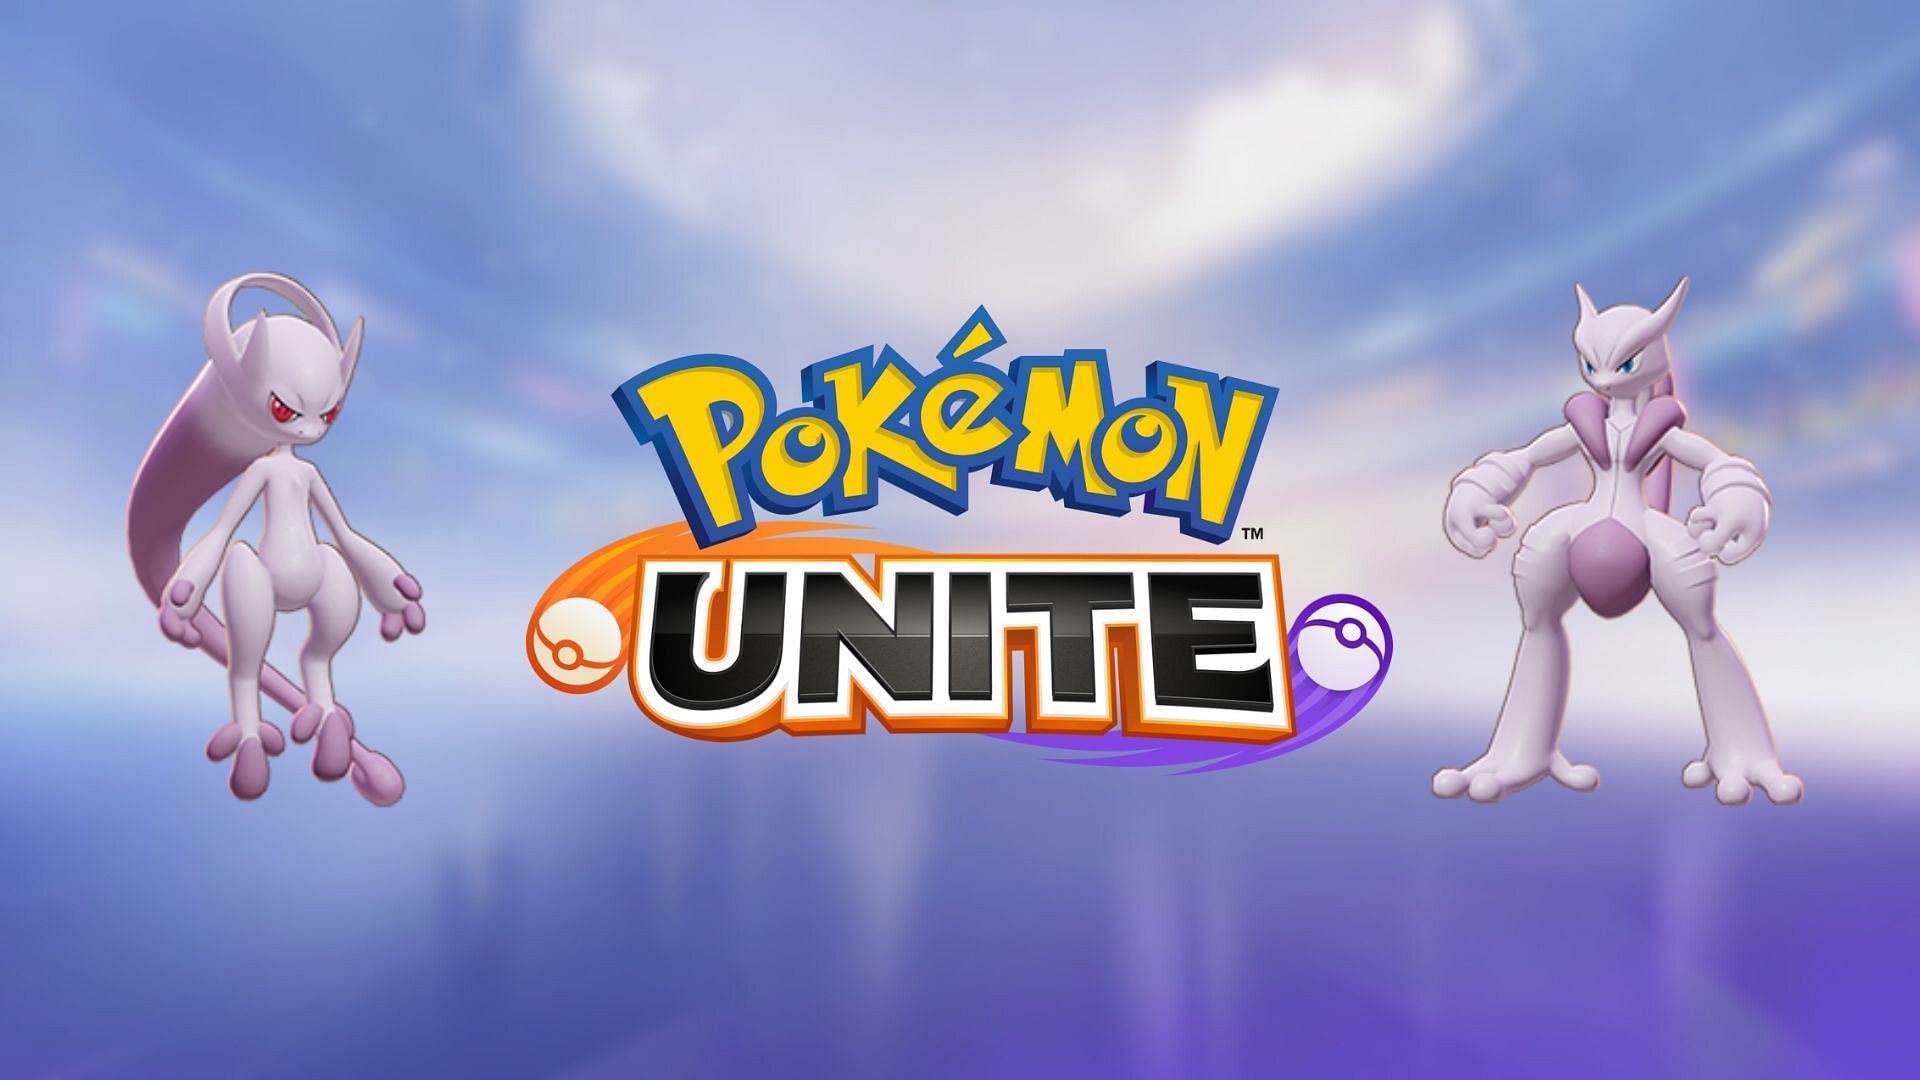 Is recent Mythical debut ruining Pokemon Unite experience? 